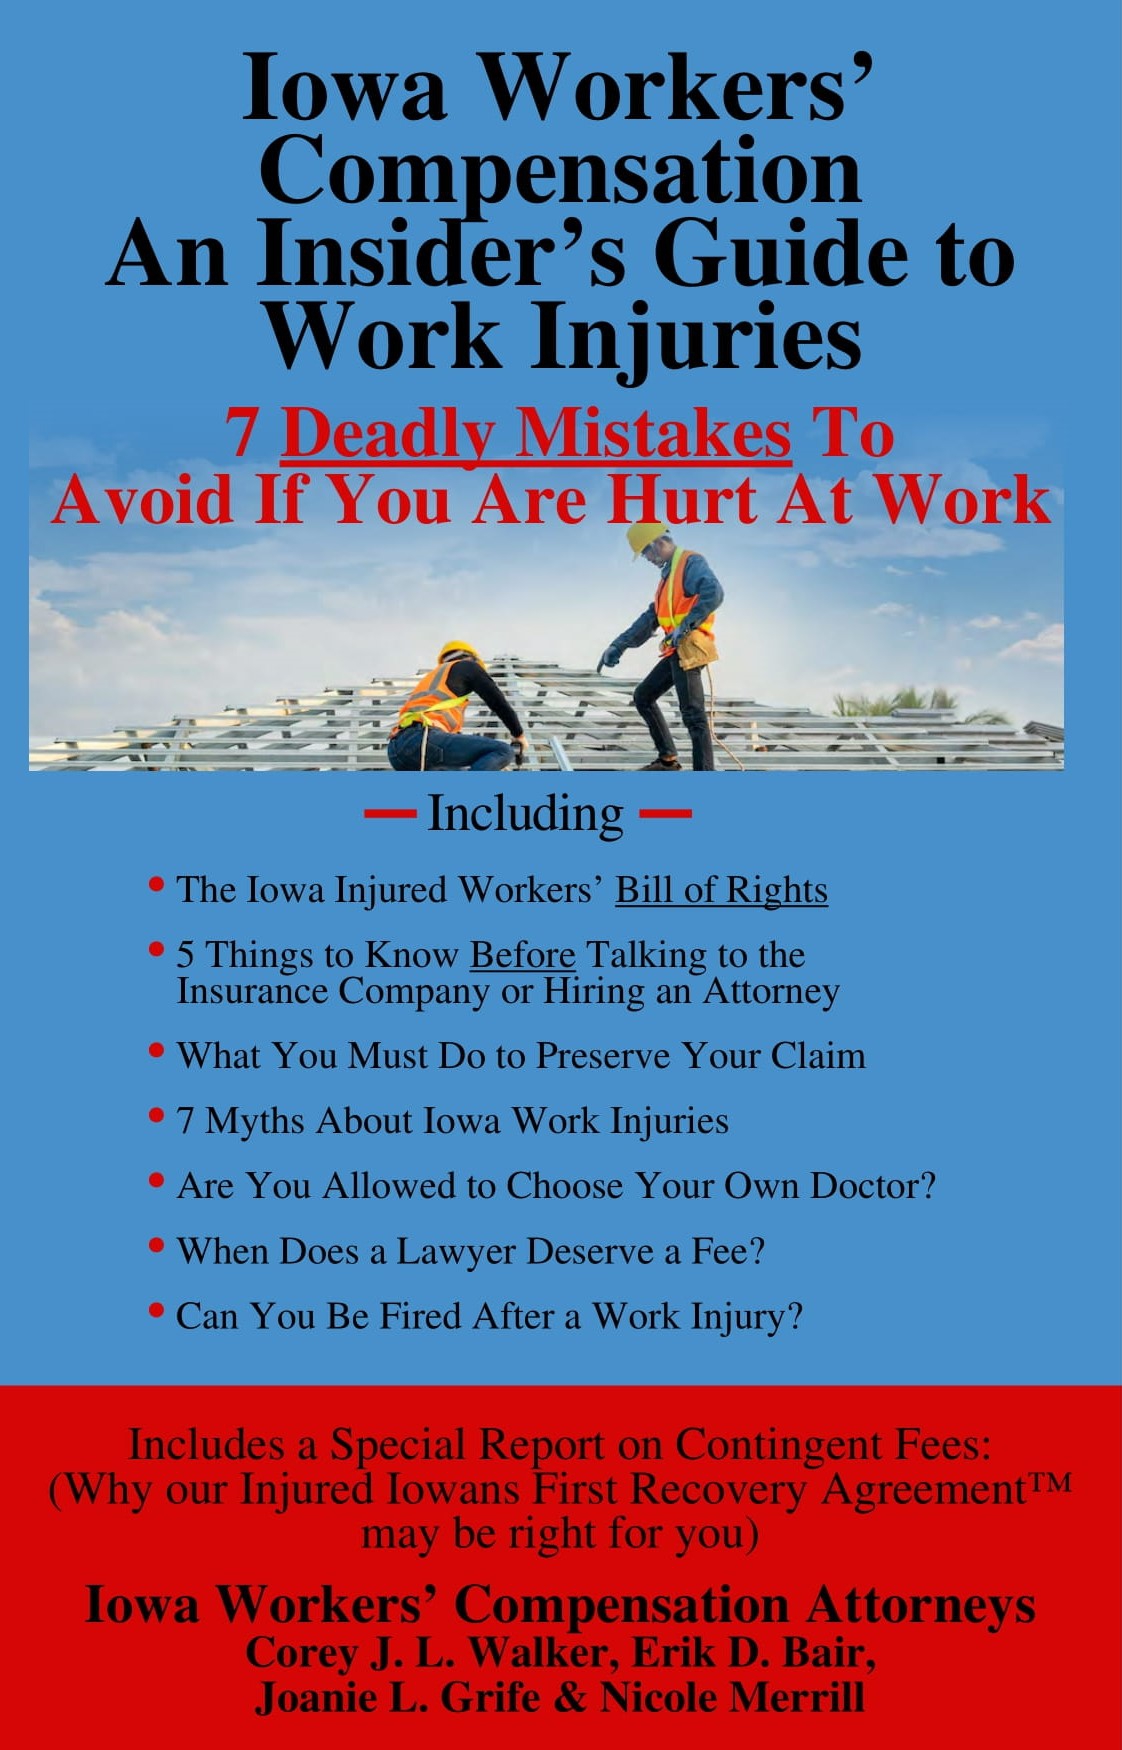 Iowa Workers Compensation An Insider's Guide to Work Injury